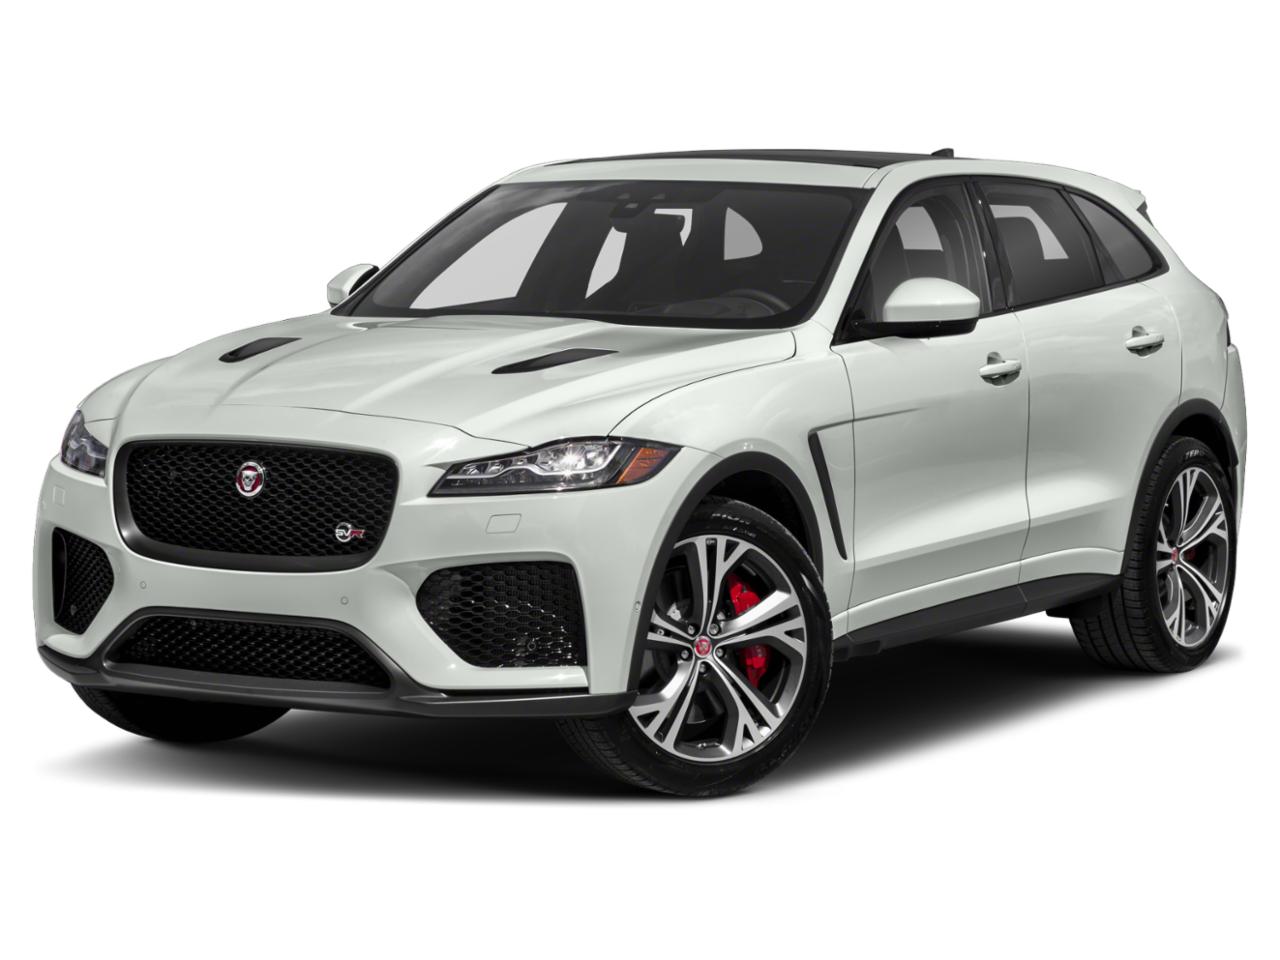 2020 Jaguar F-PACE Vehicle Photo in Willow Grove, PA 19090